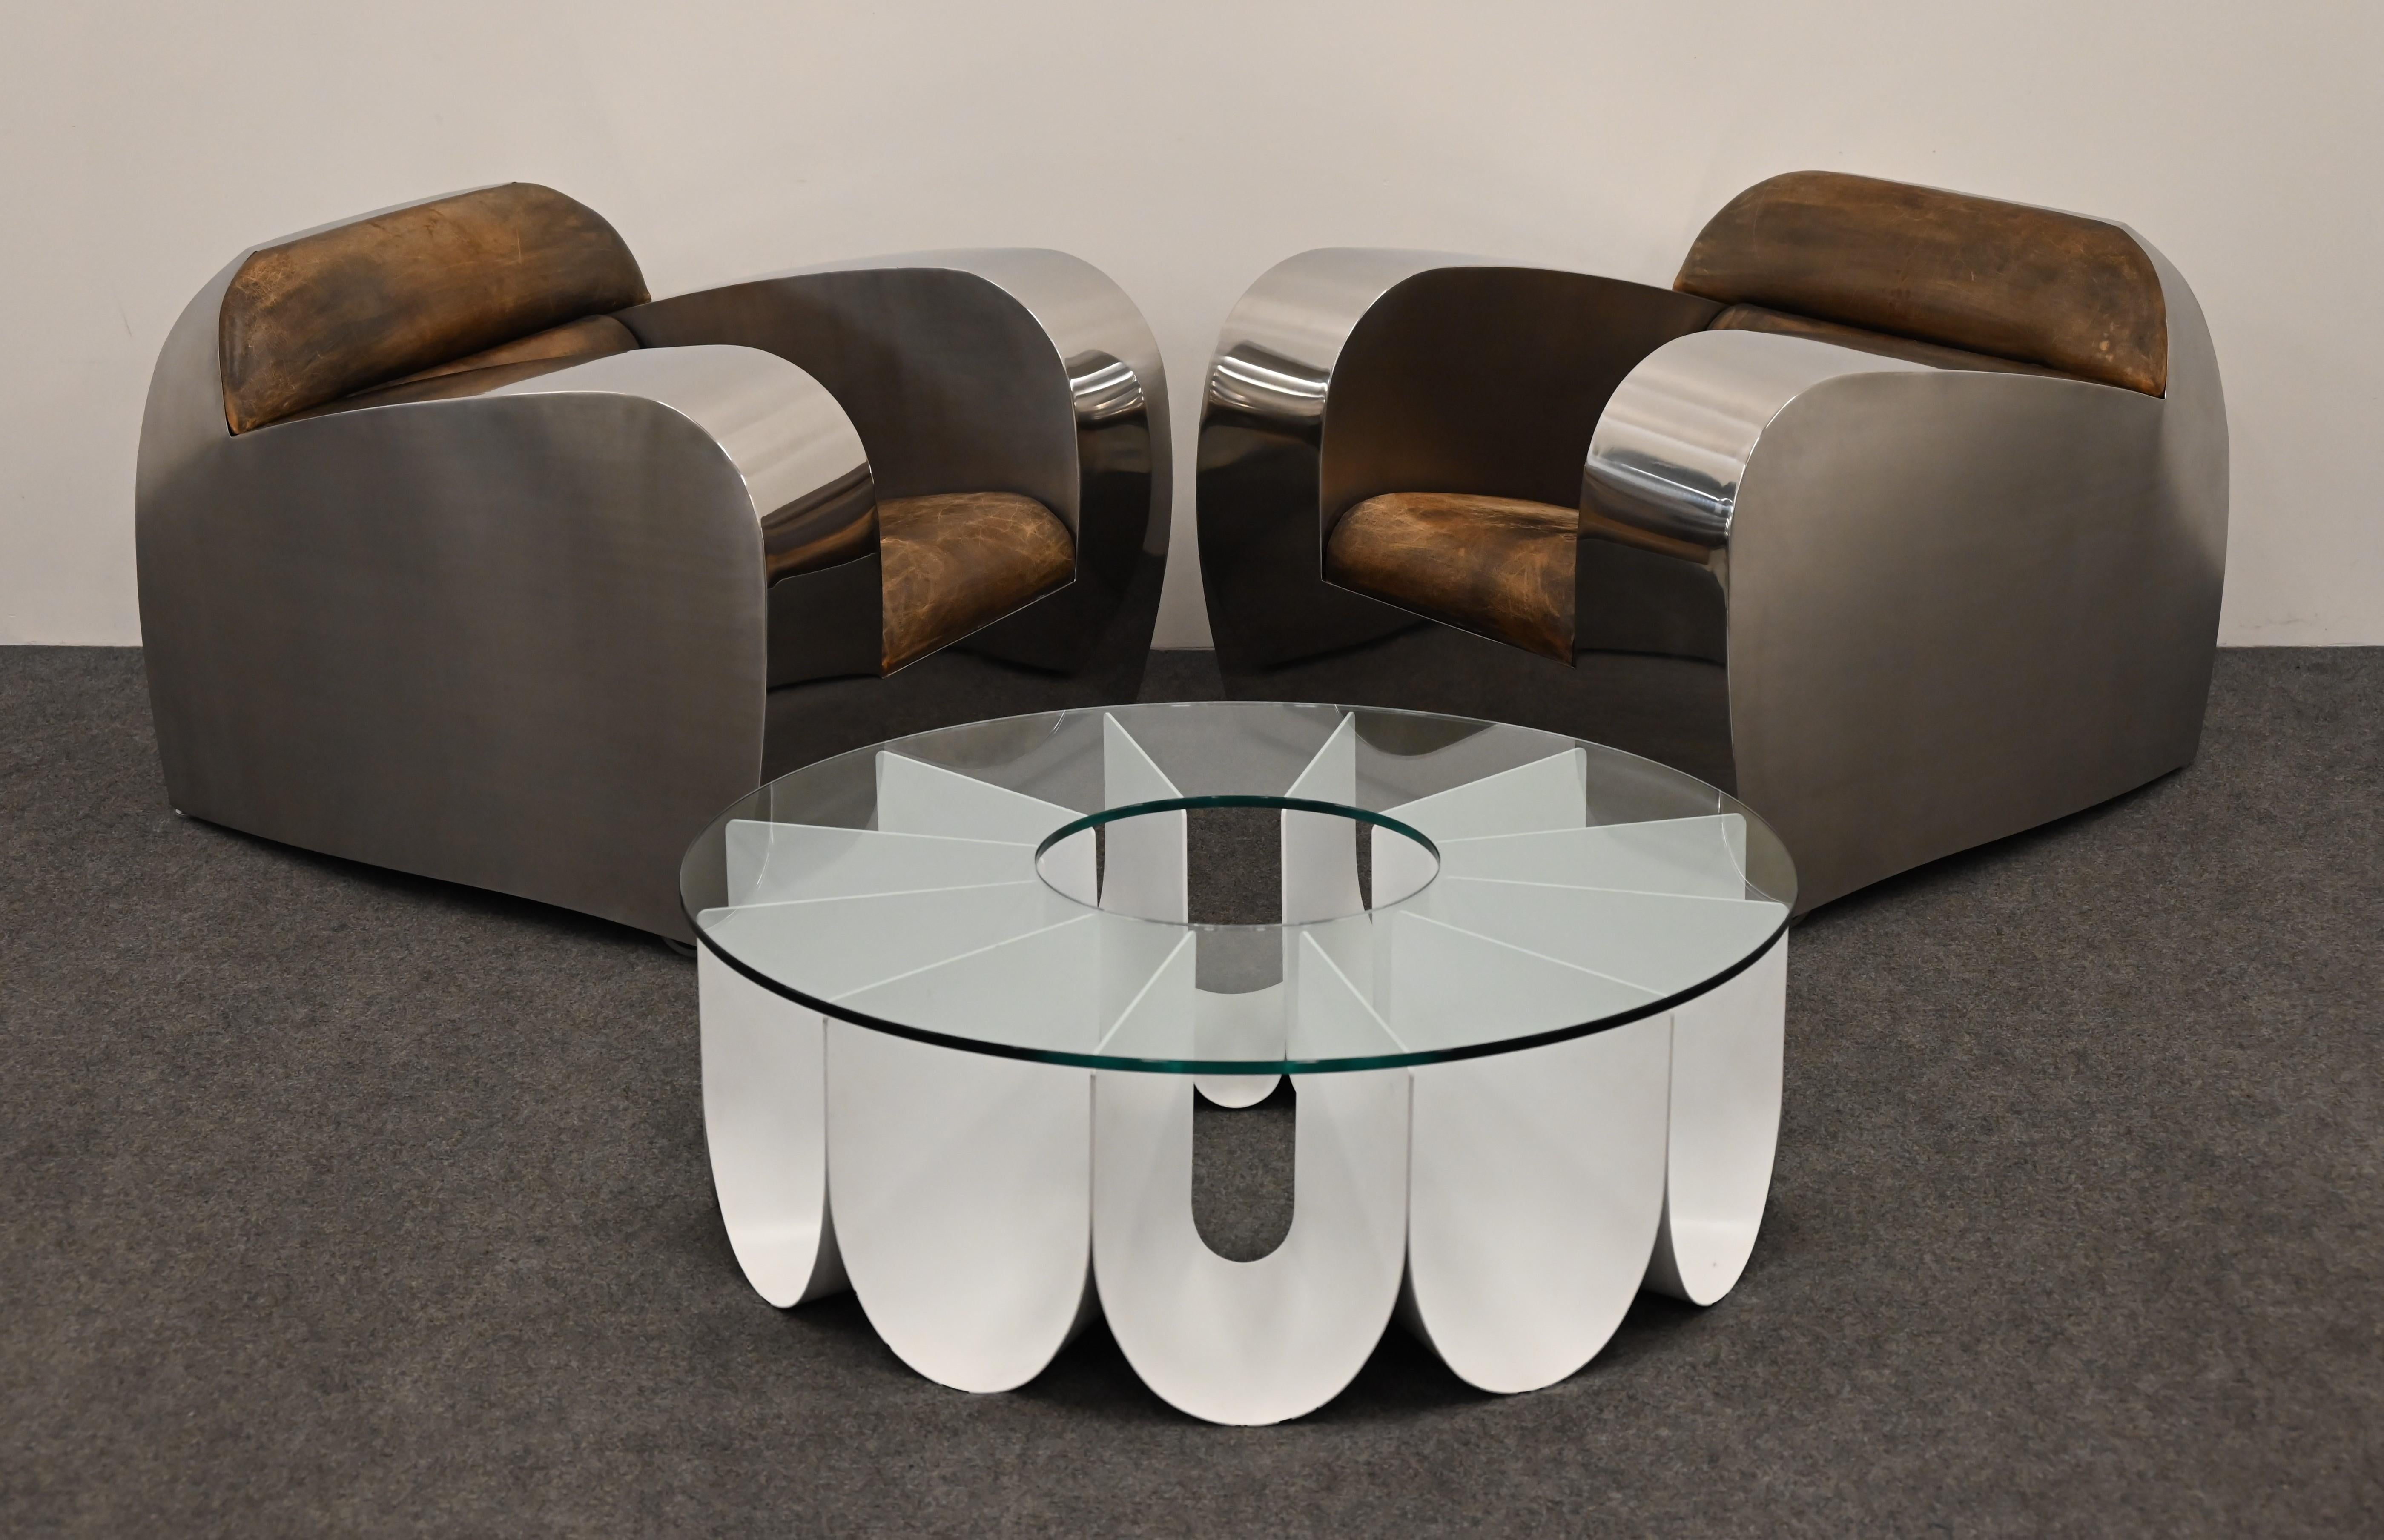 Iride Cocktail Table designed by Alessandro Busana for Roche Bobois, 2015 For Sale 6